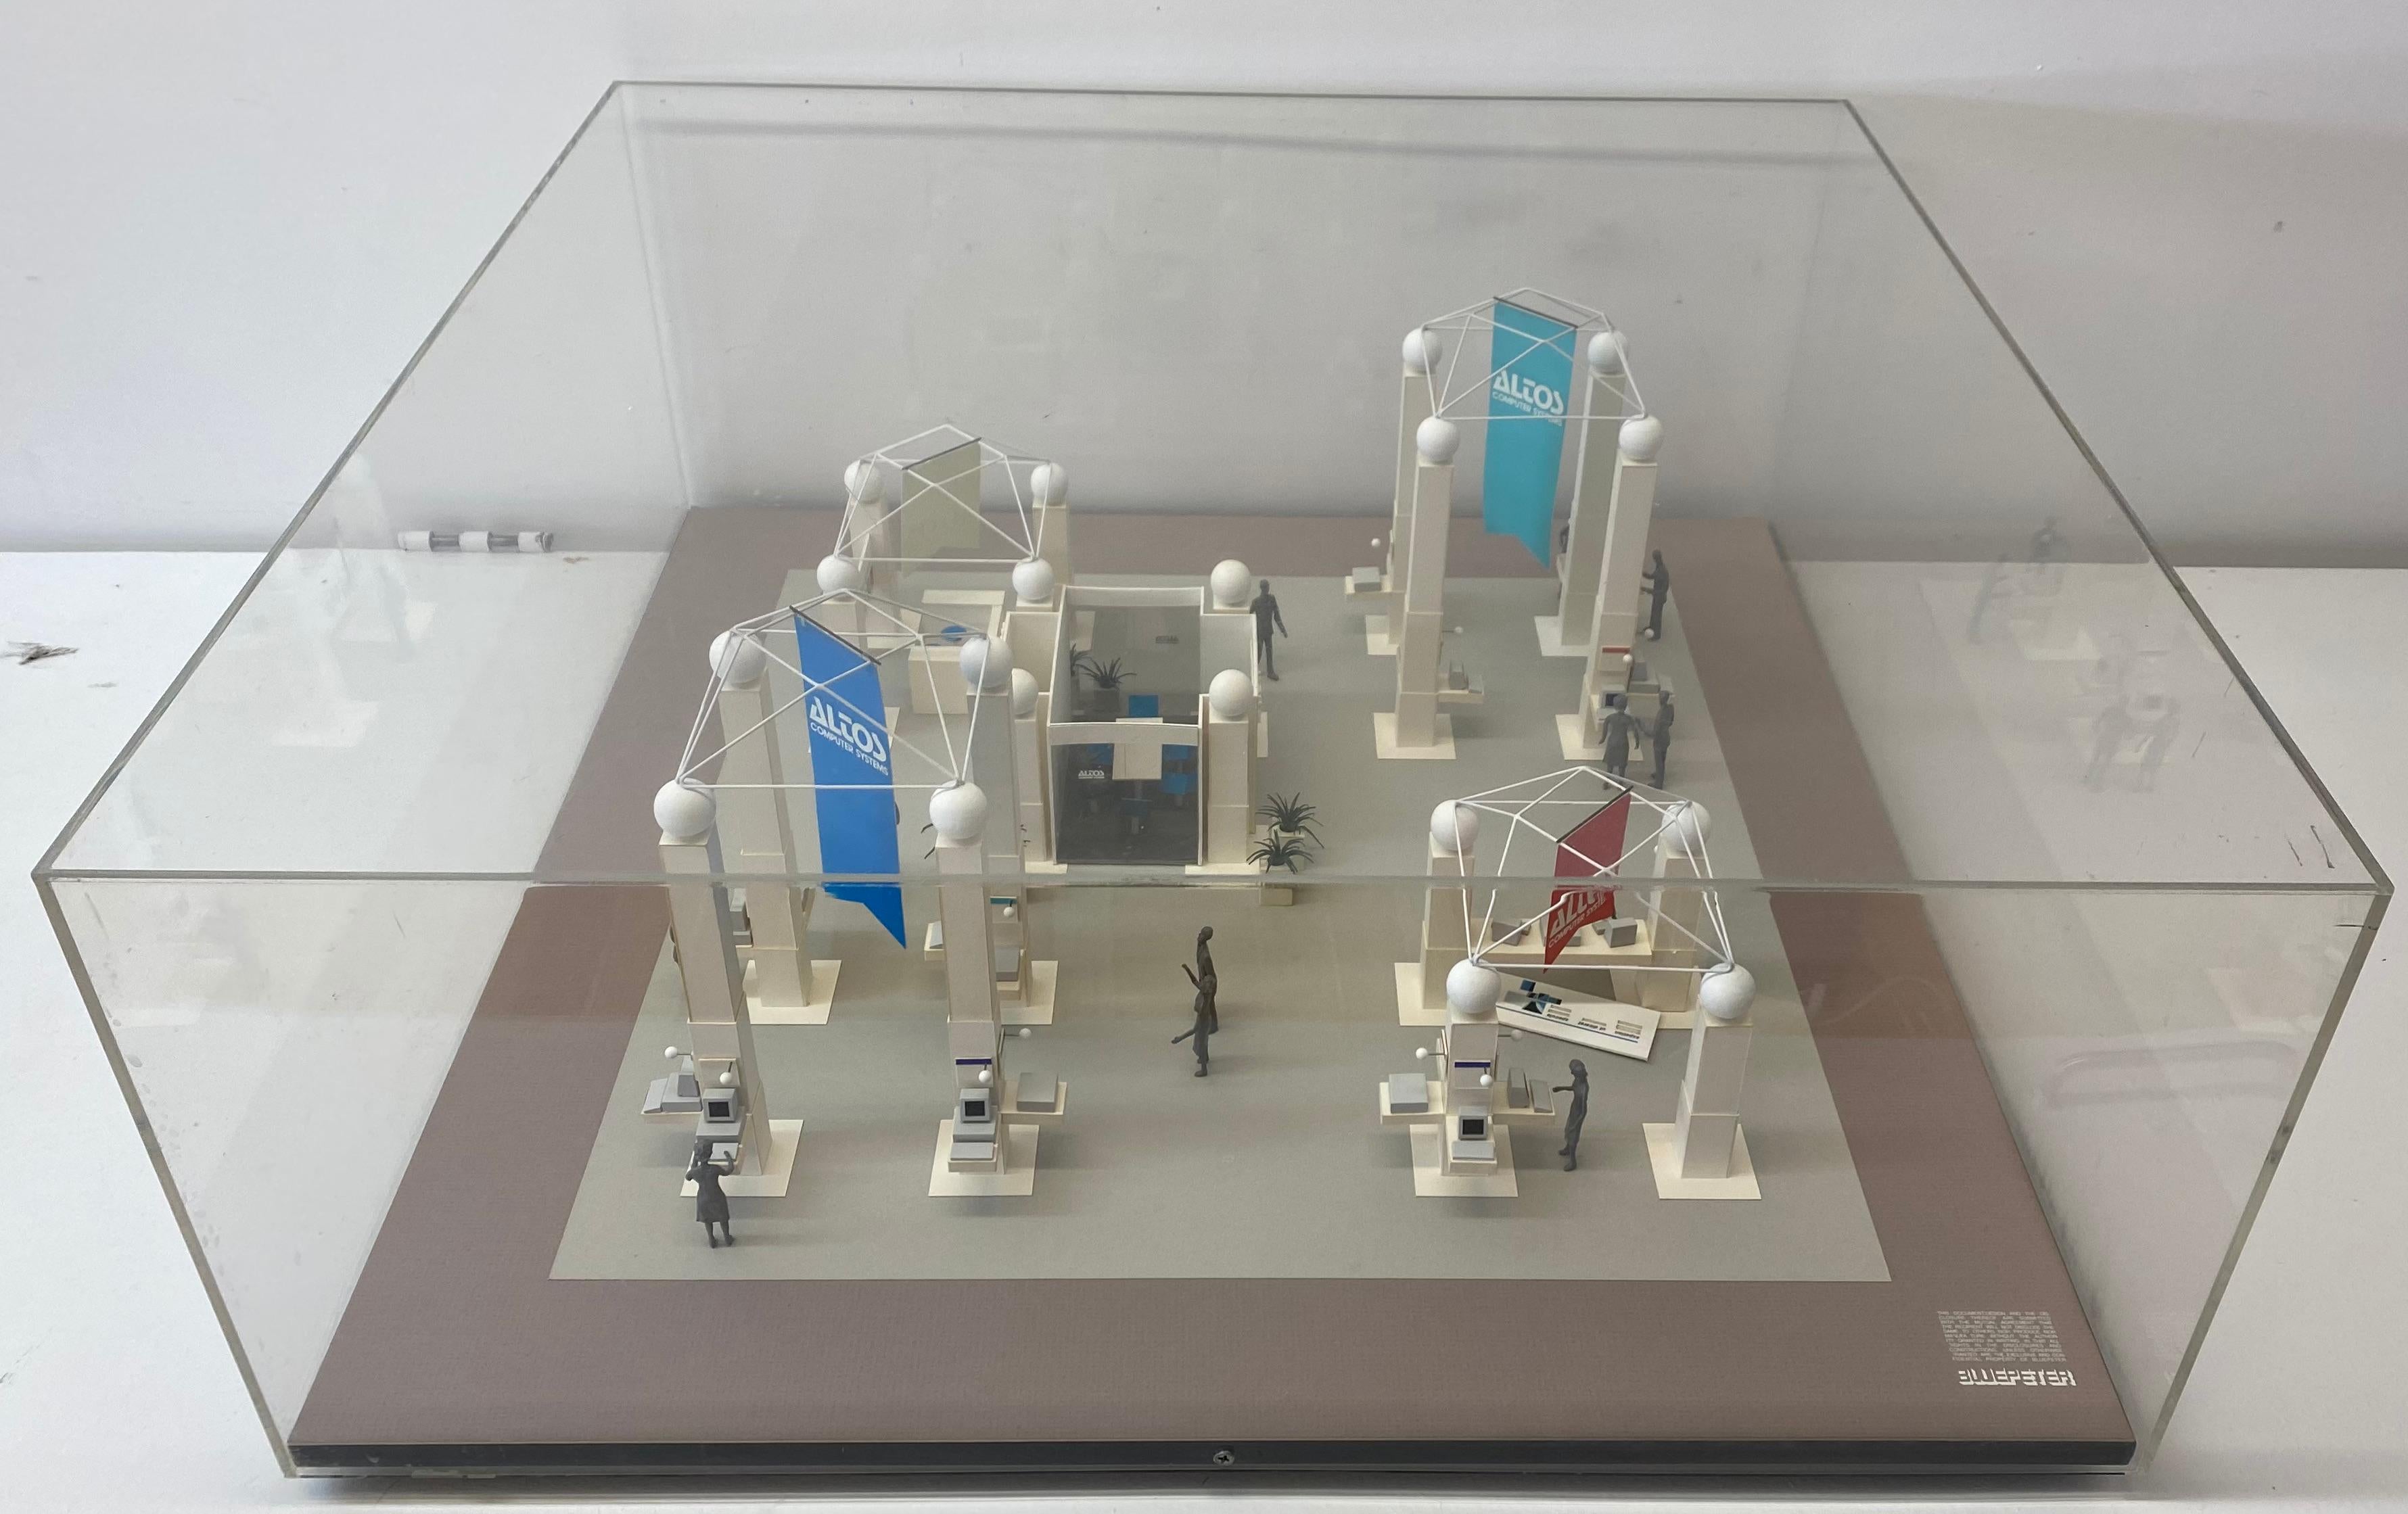 Altos Computer systems trade show architecture Model C.1980s

Designed for Altos Computer Systems by Bluepeter

Housed under clear acrylic case

A few of the figures have toppled (easily restore)

Measures: 24.5